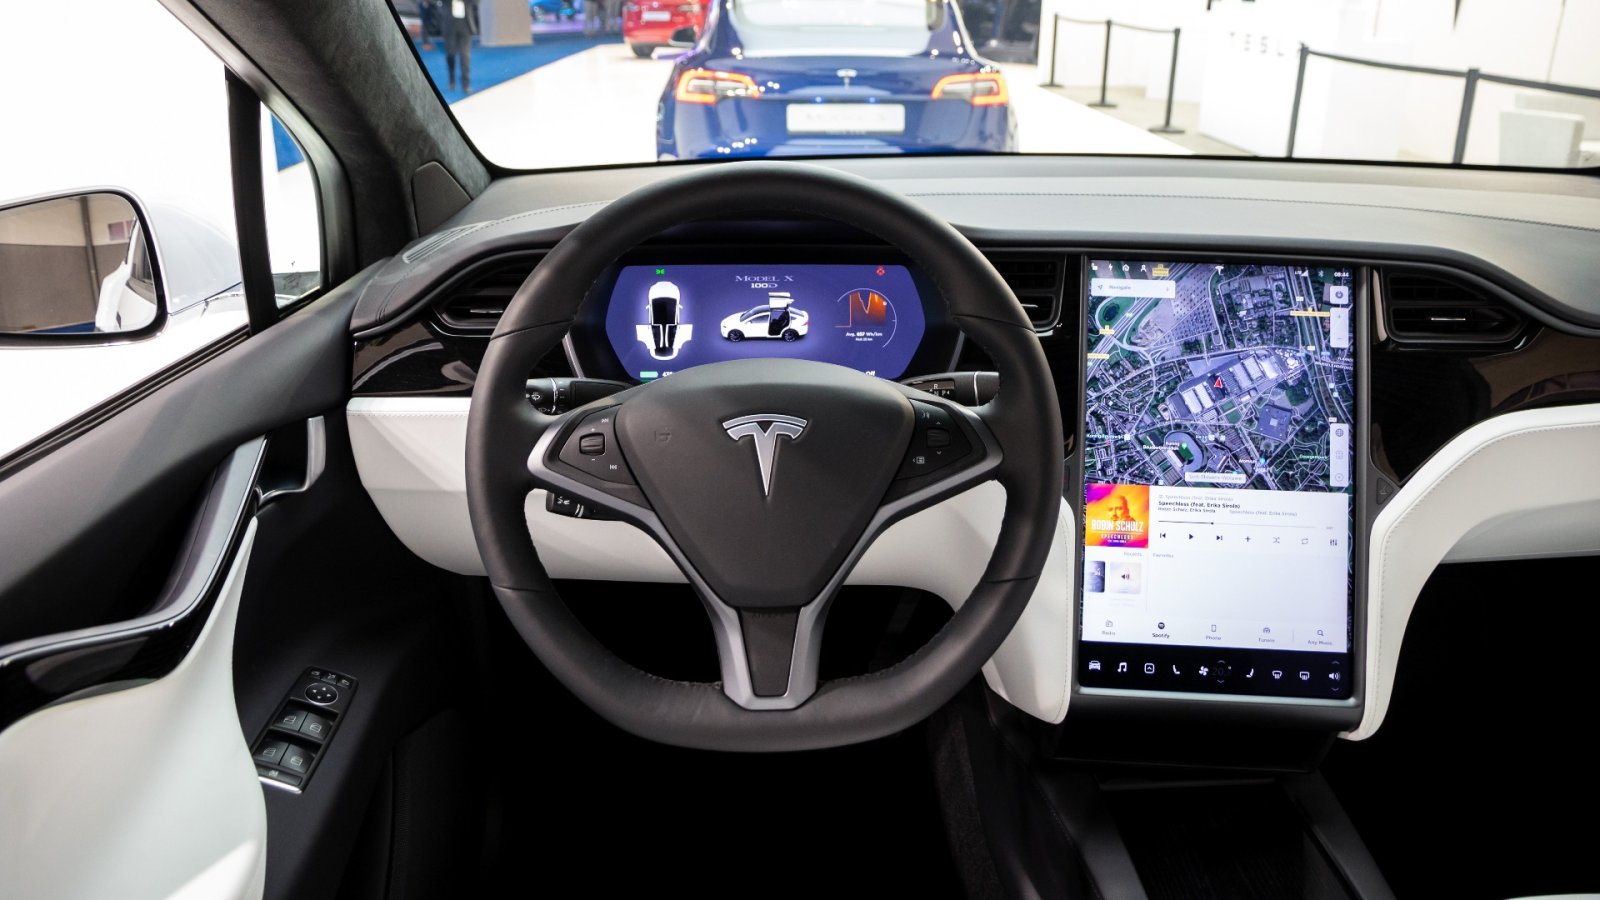 What’s the problem with Tesla cars and why is the software considered dangerous?